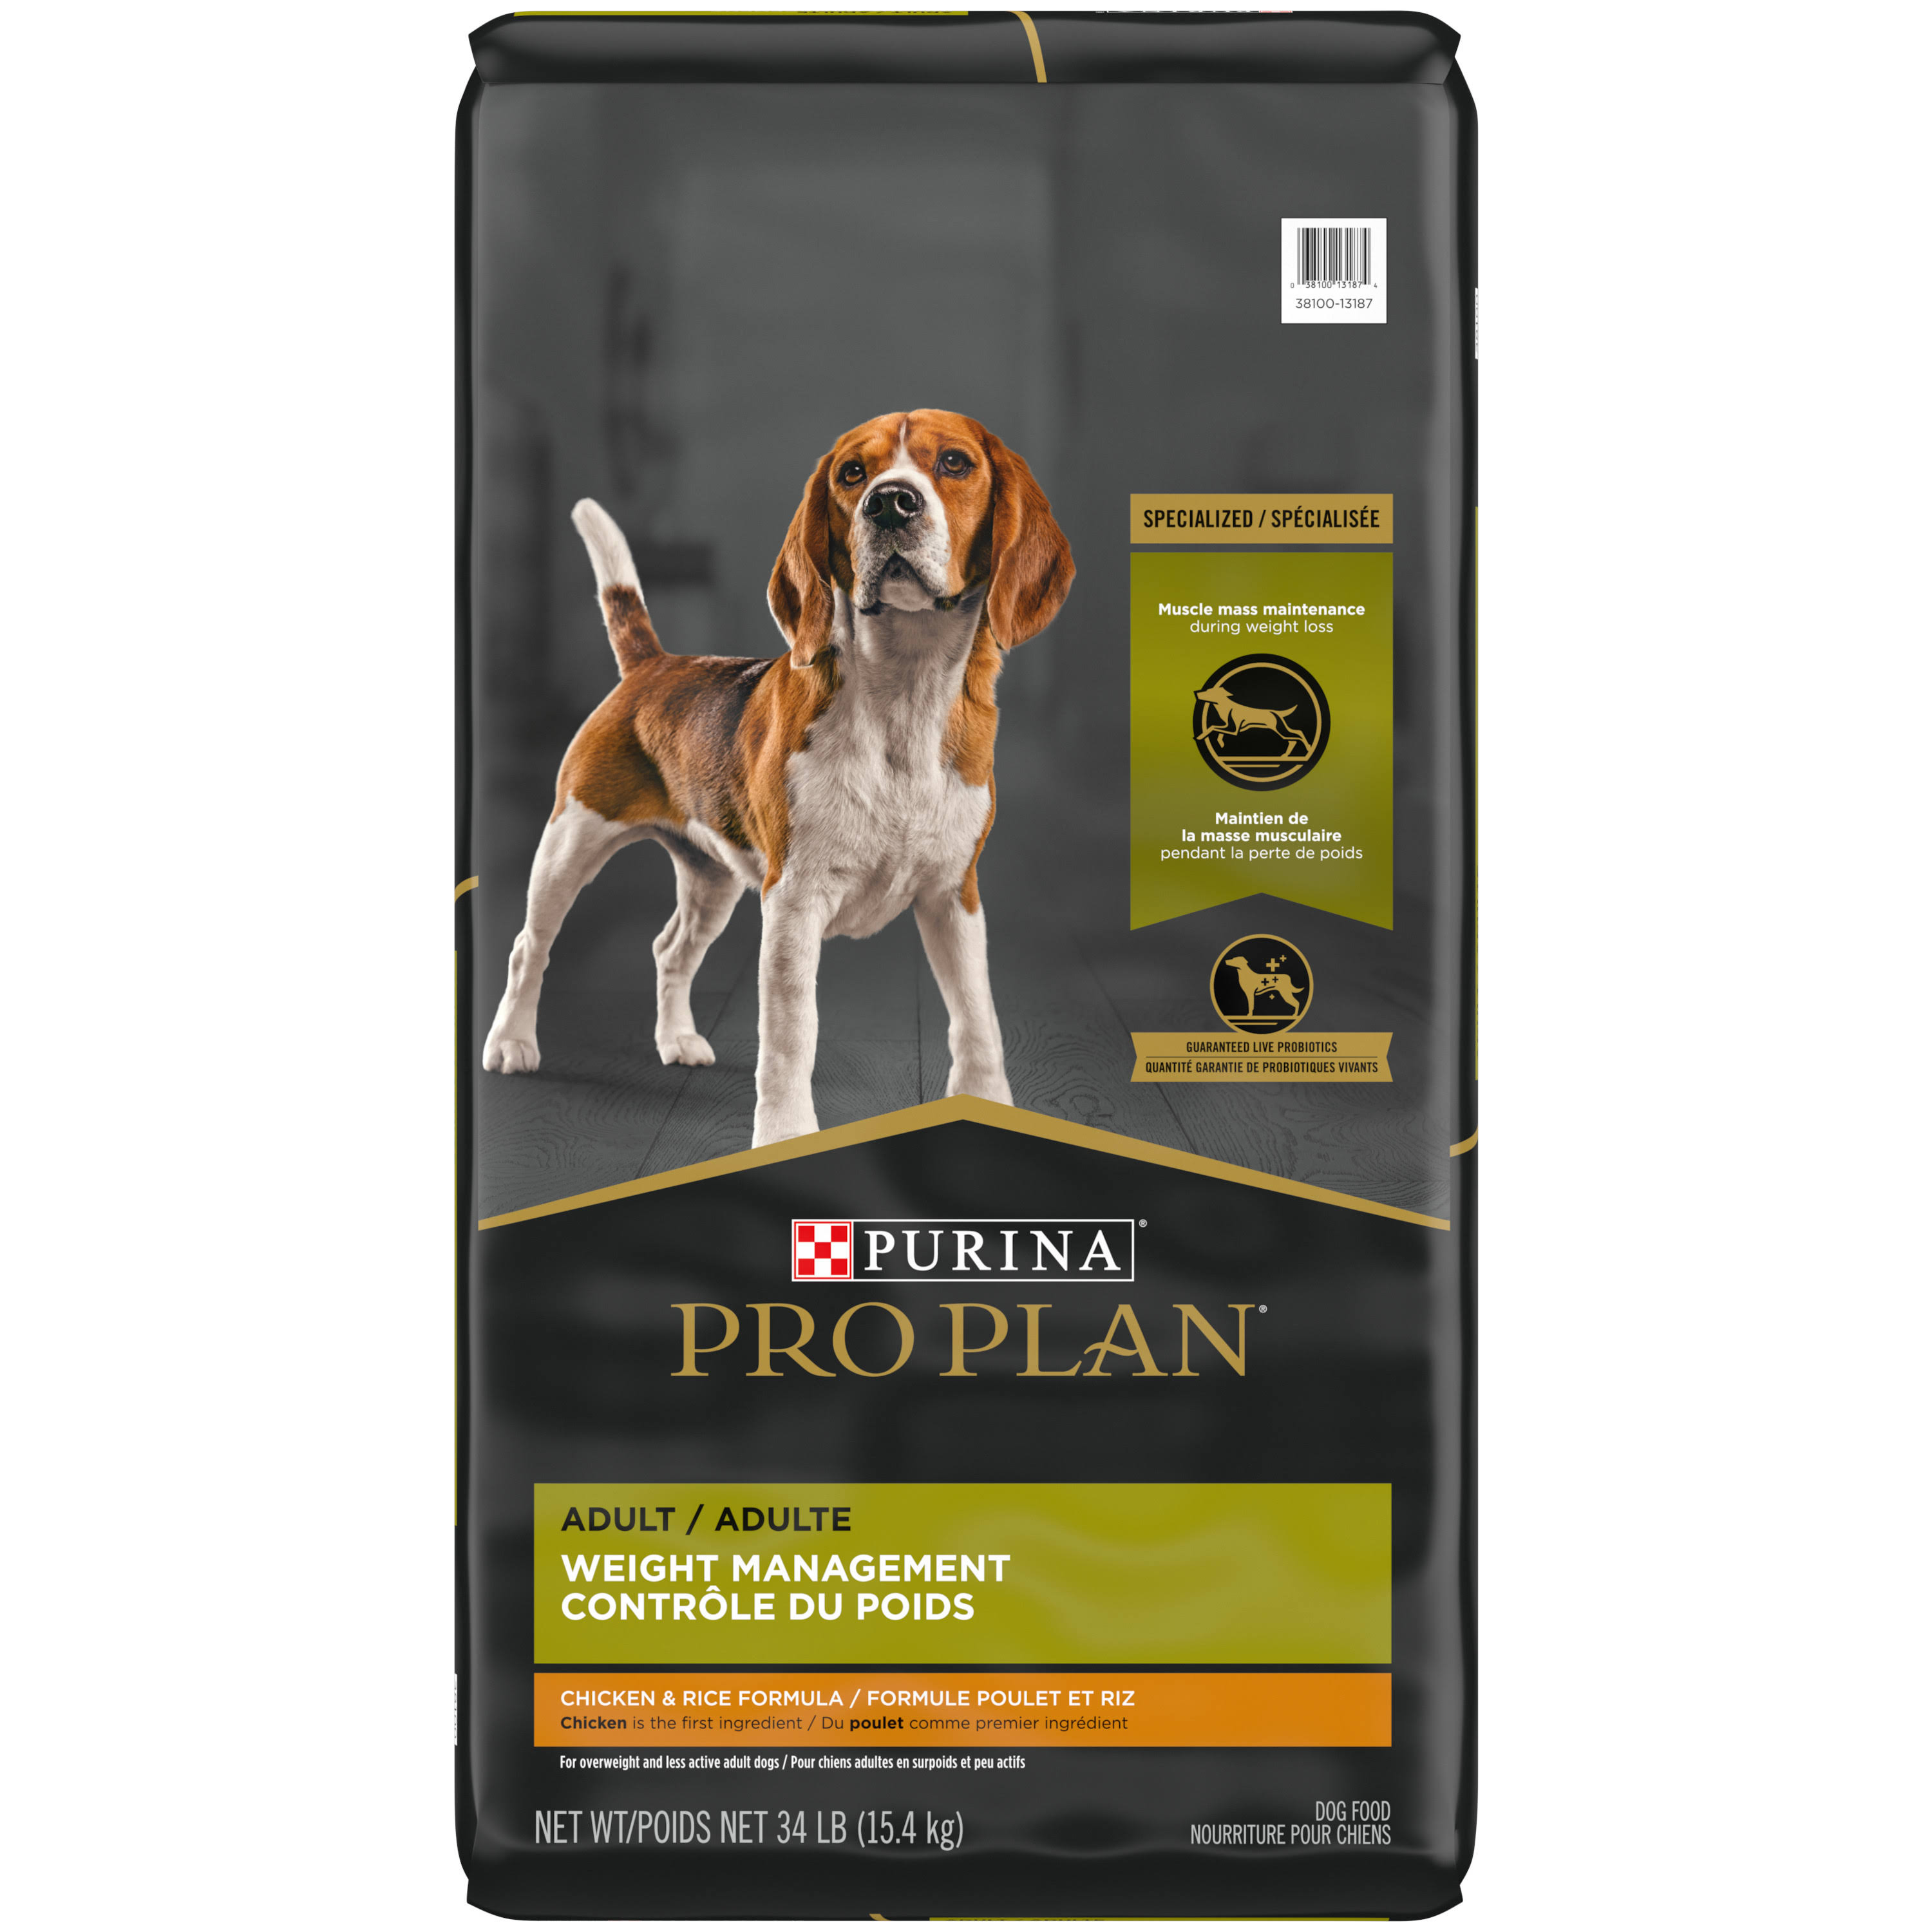 Purina Pro Plan Dry Dog Food - Focus, Adult Weight Management Formula, 6lbs, 34lbs